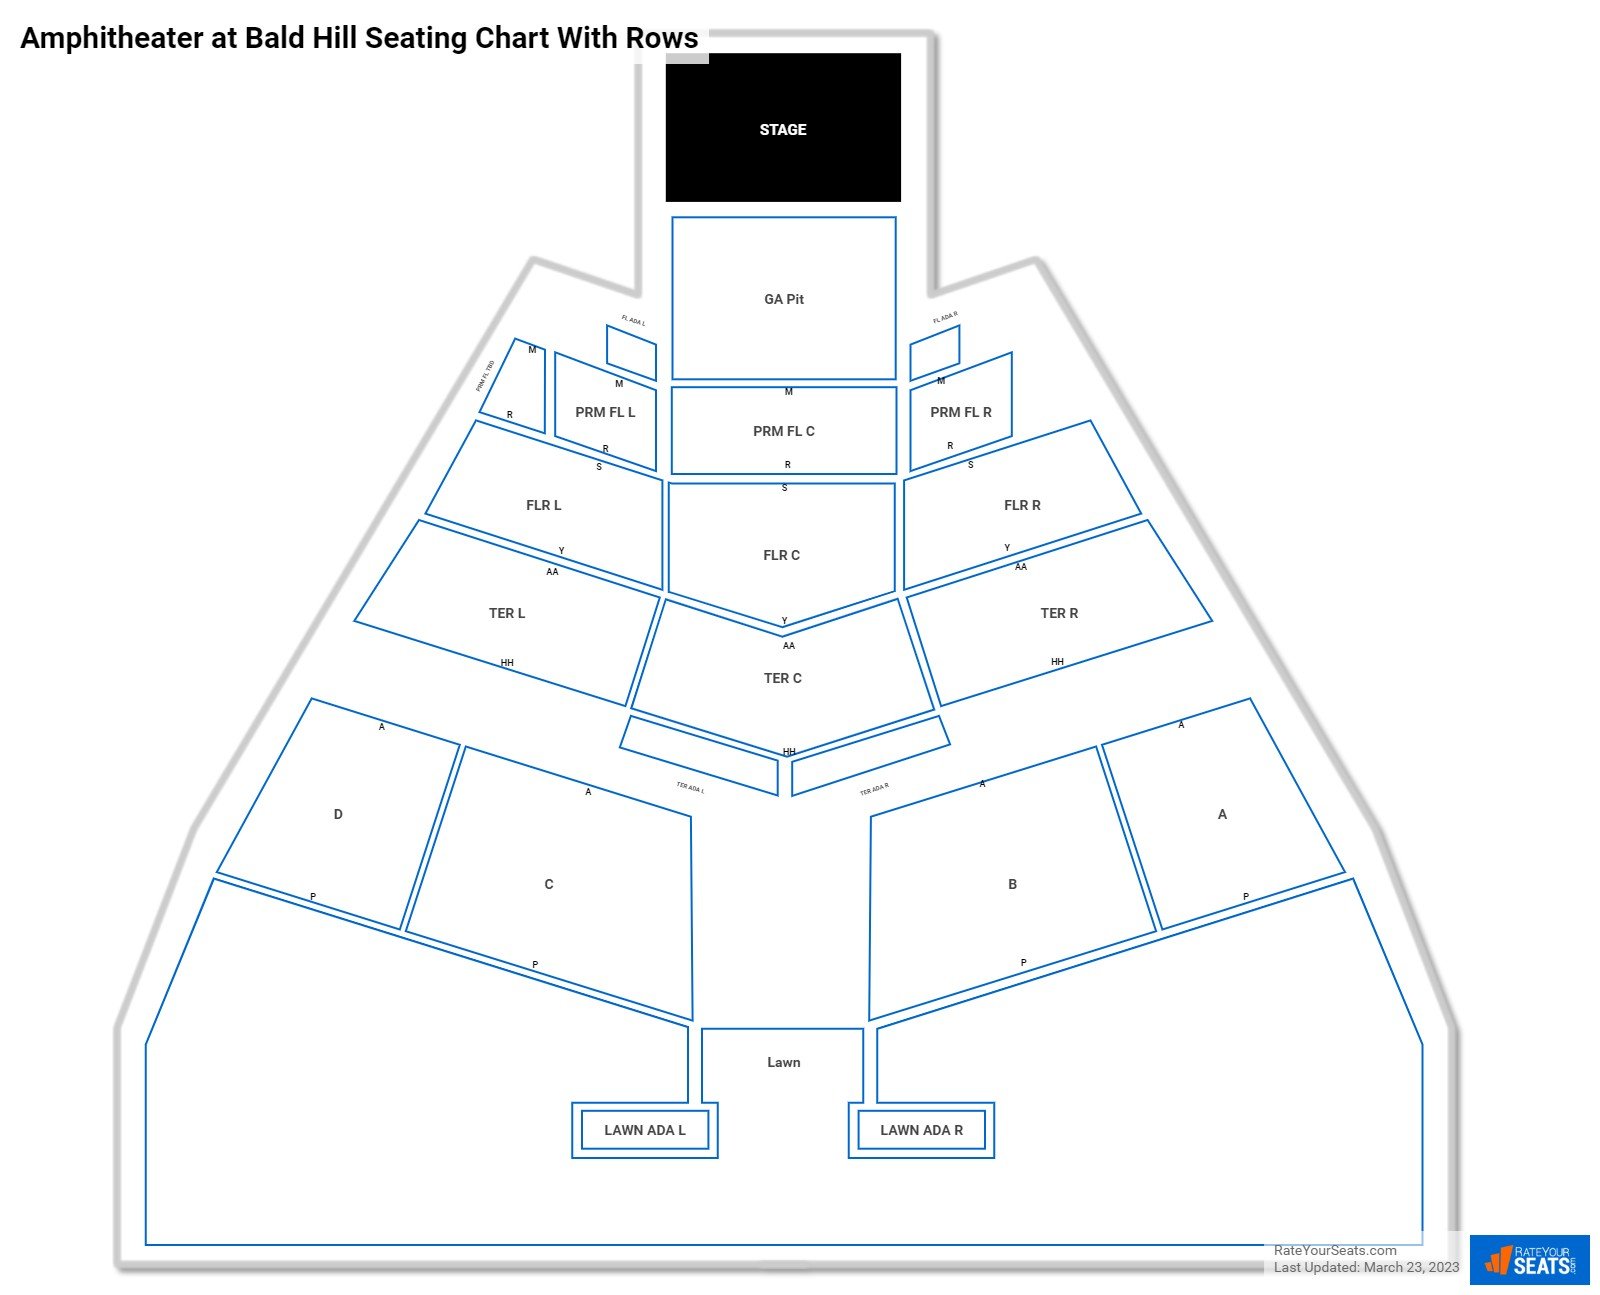 Long Island Community Hospital Amphitheater seating chart with row numbers